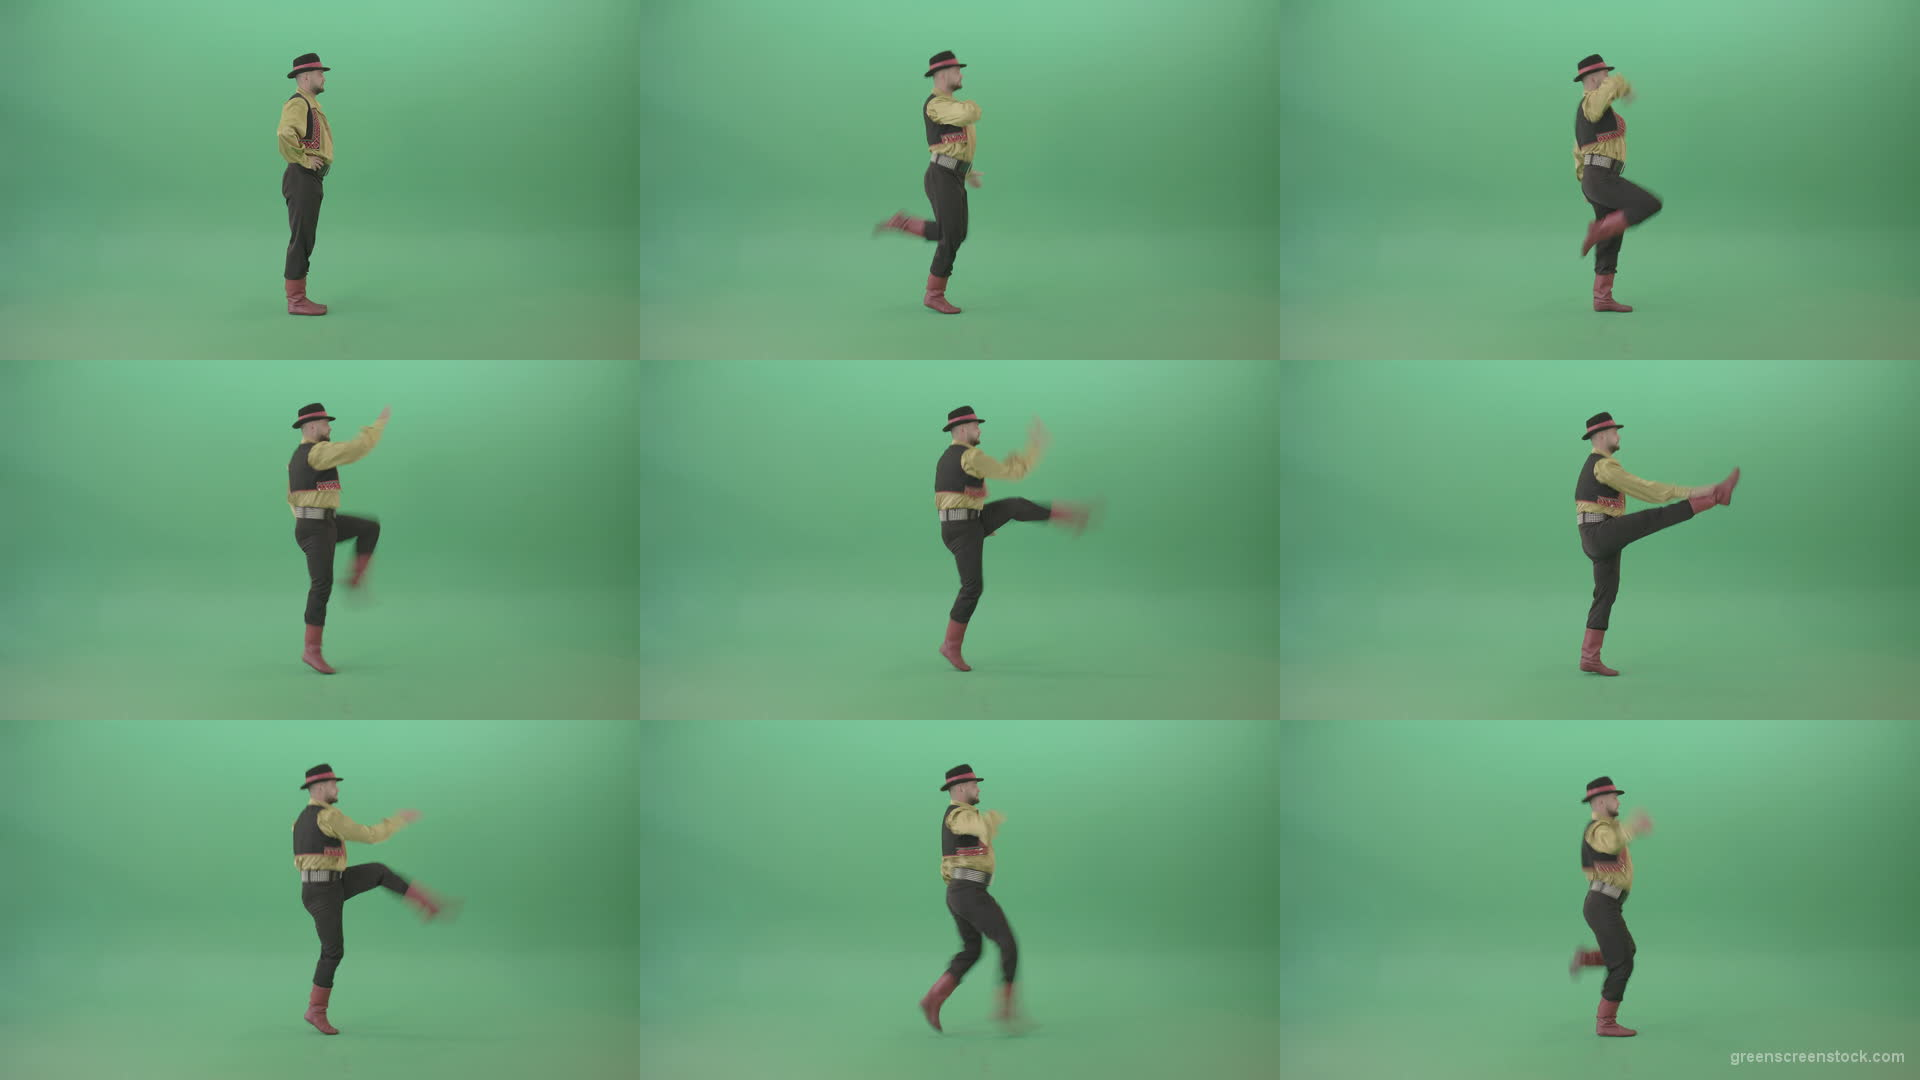 Romanian-Gypsy-Man-dancing-with-clapping-hand-with-side-view-isolated-4K-Green-Screen-Video-Footage-1920 Green Screen Stock